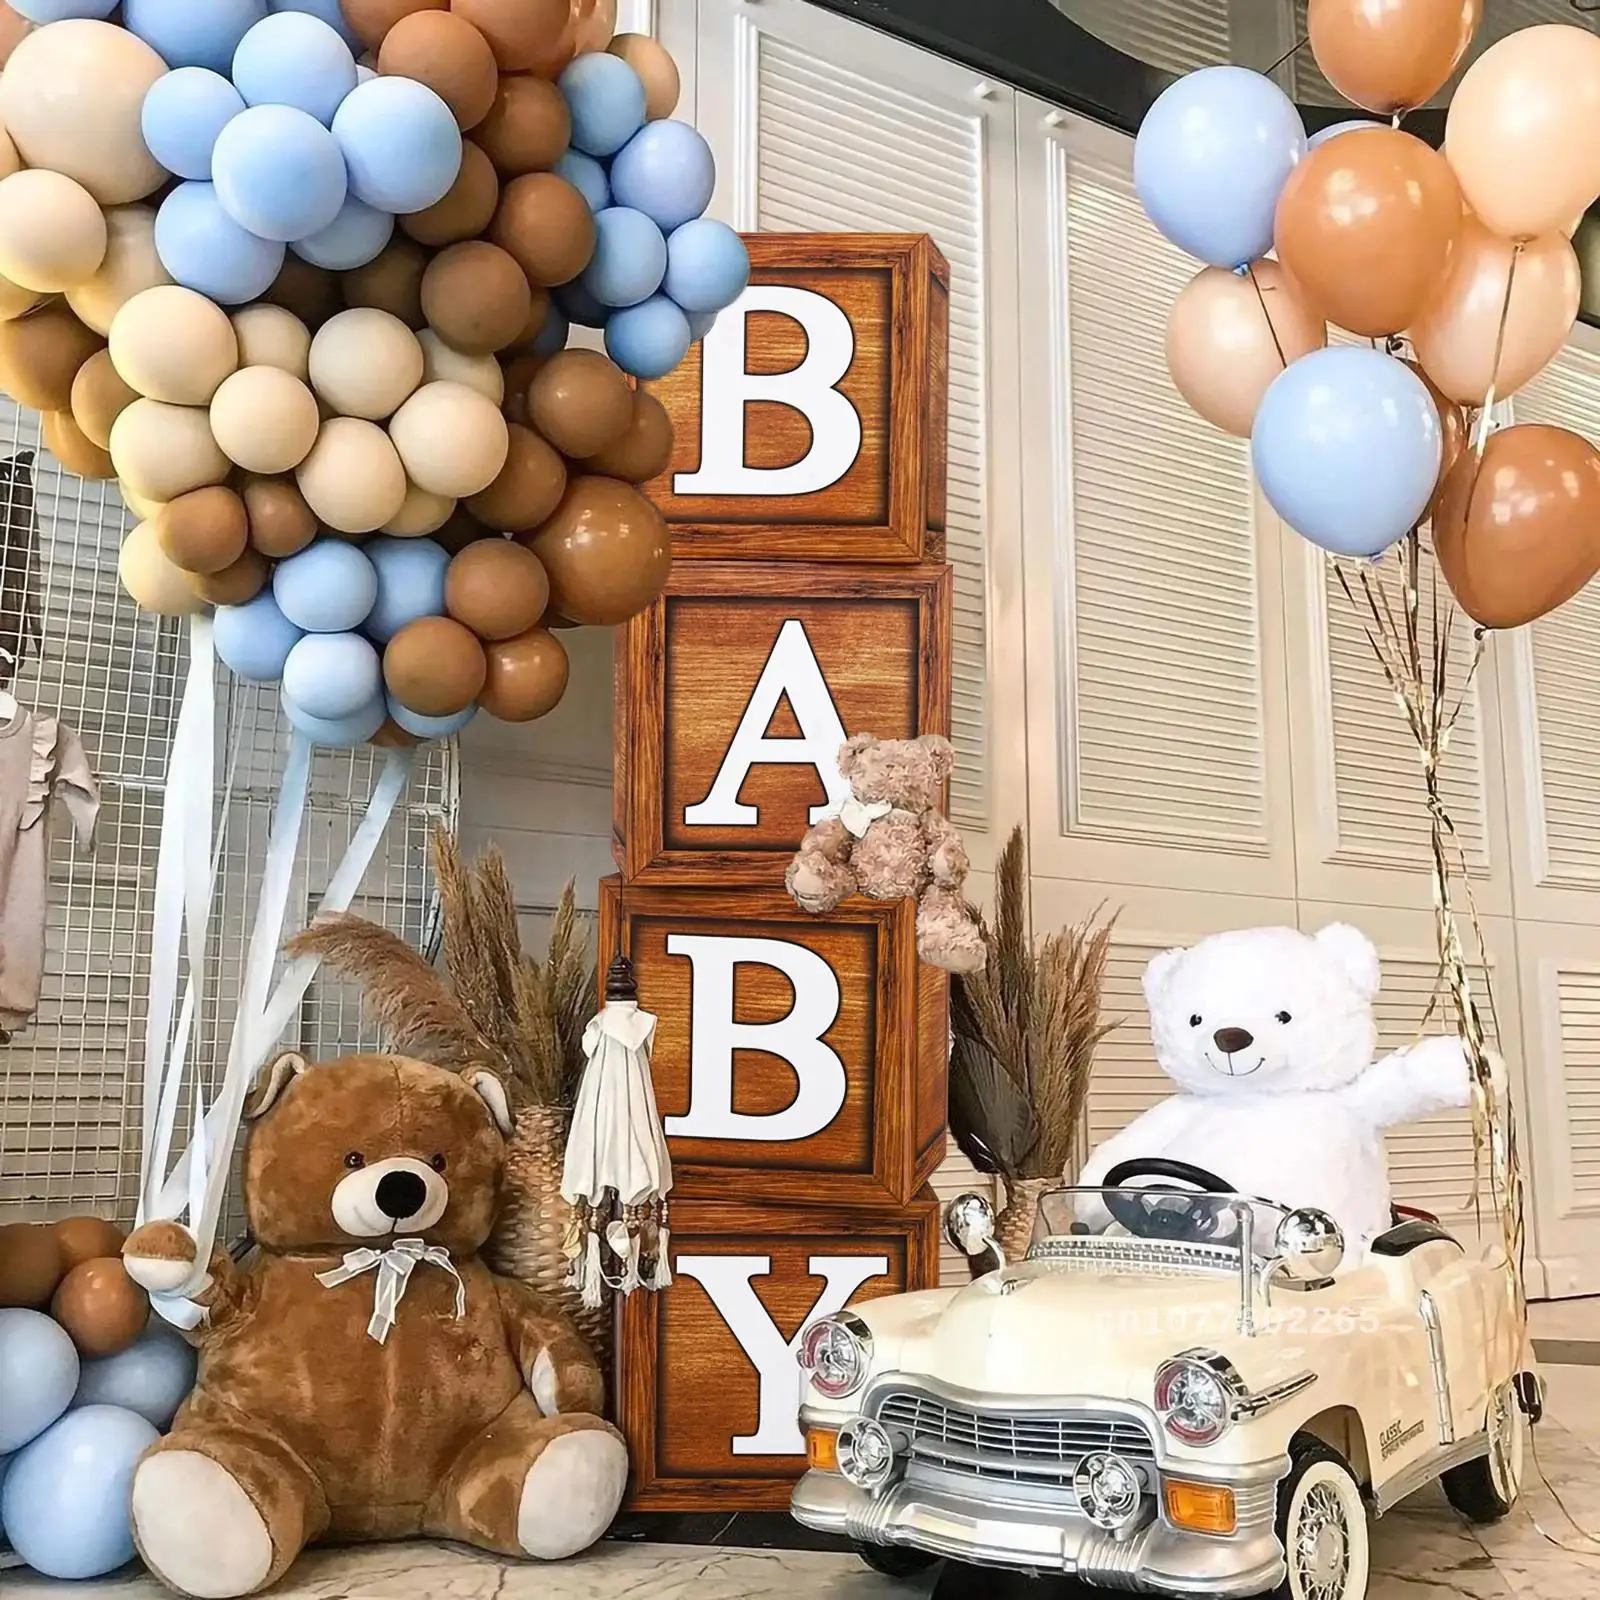 

Wood Grain Brow Baby Shower Box Baby Balloon Boxes 1st Birthday Party Decor Kids Teddy Bear Baby Shower Boy Girl Gender Reveal